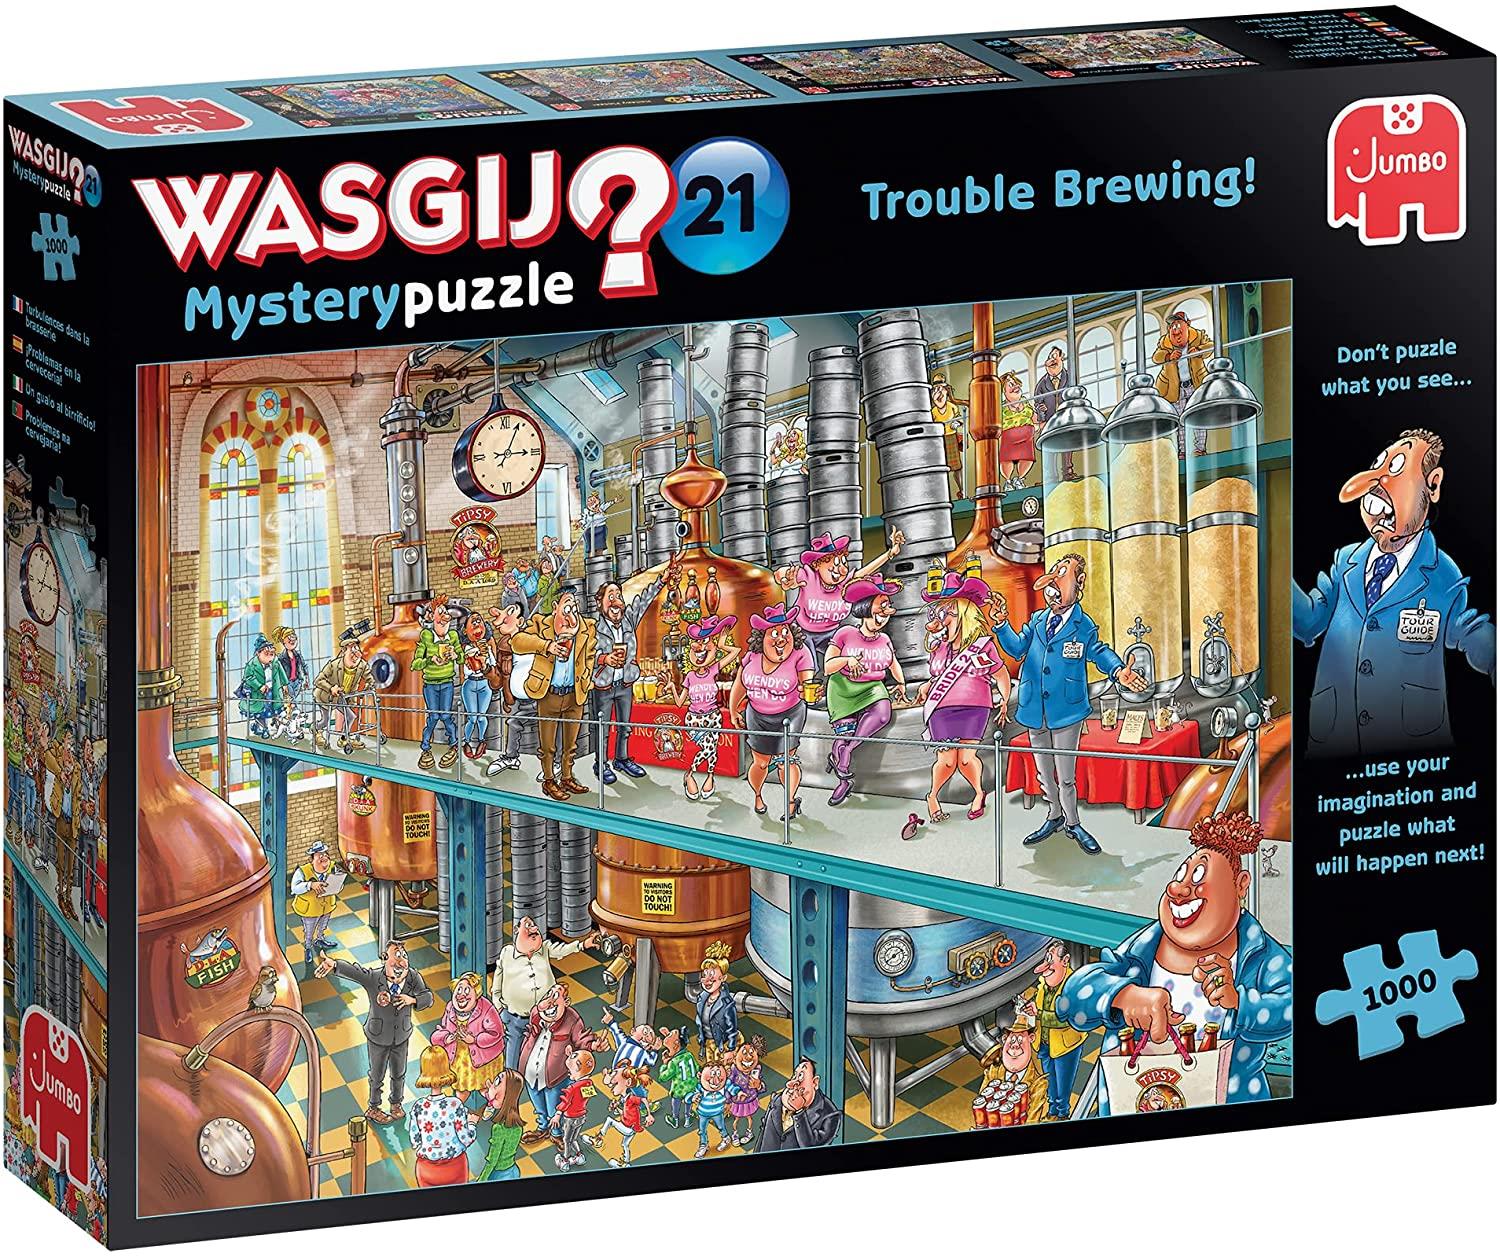 Wasgij Mystery 21 Trouble Brewing! Jigsaw Puzzle (1000 Pieces)